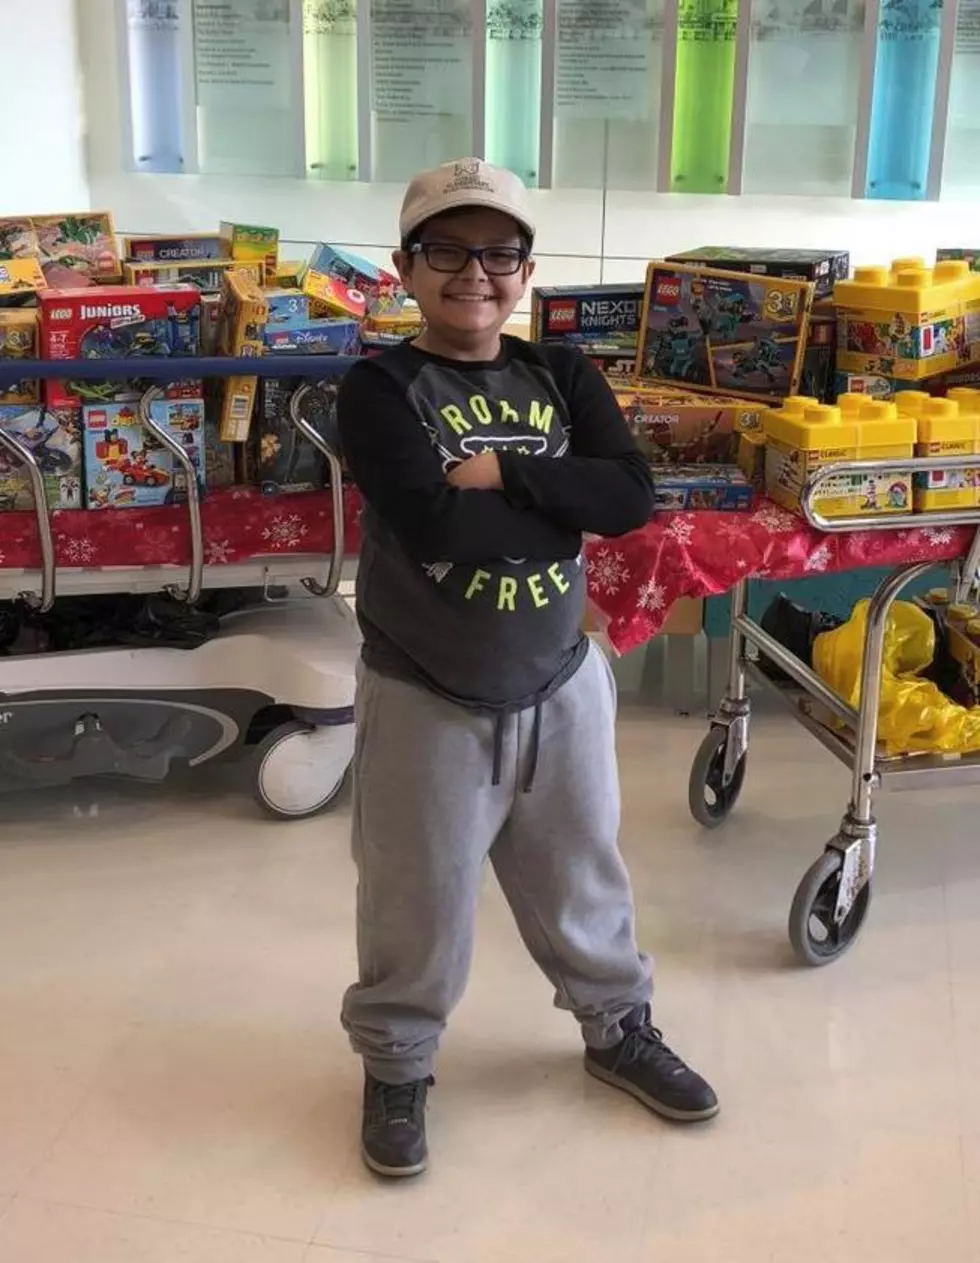 Benefit For 9 Year Old Sebastian – March 26th at Iron Works